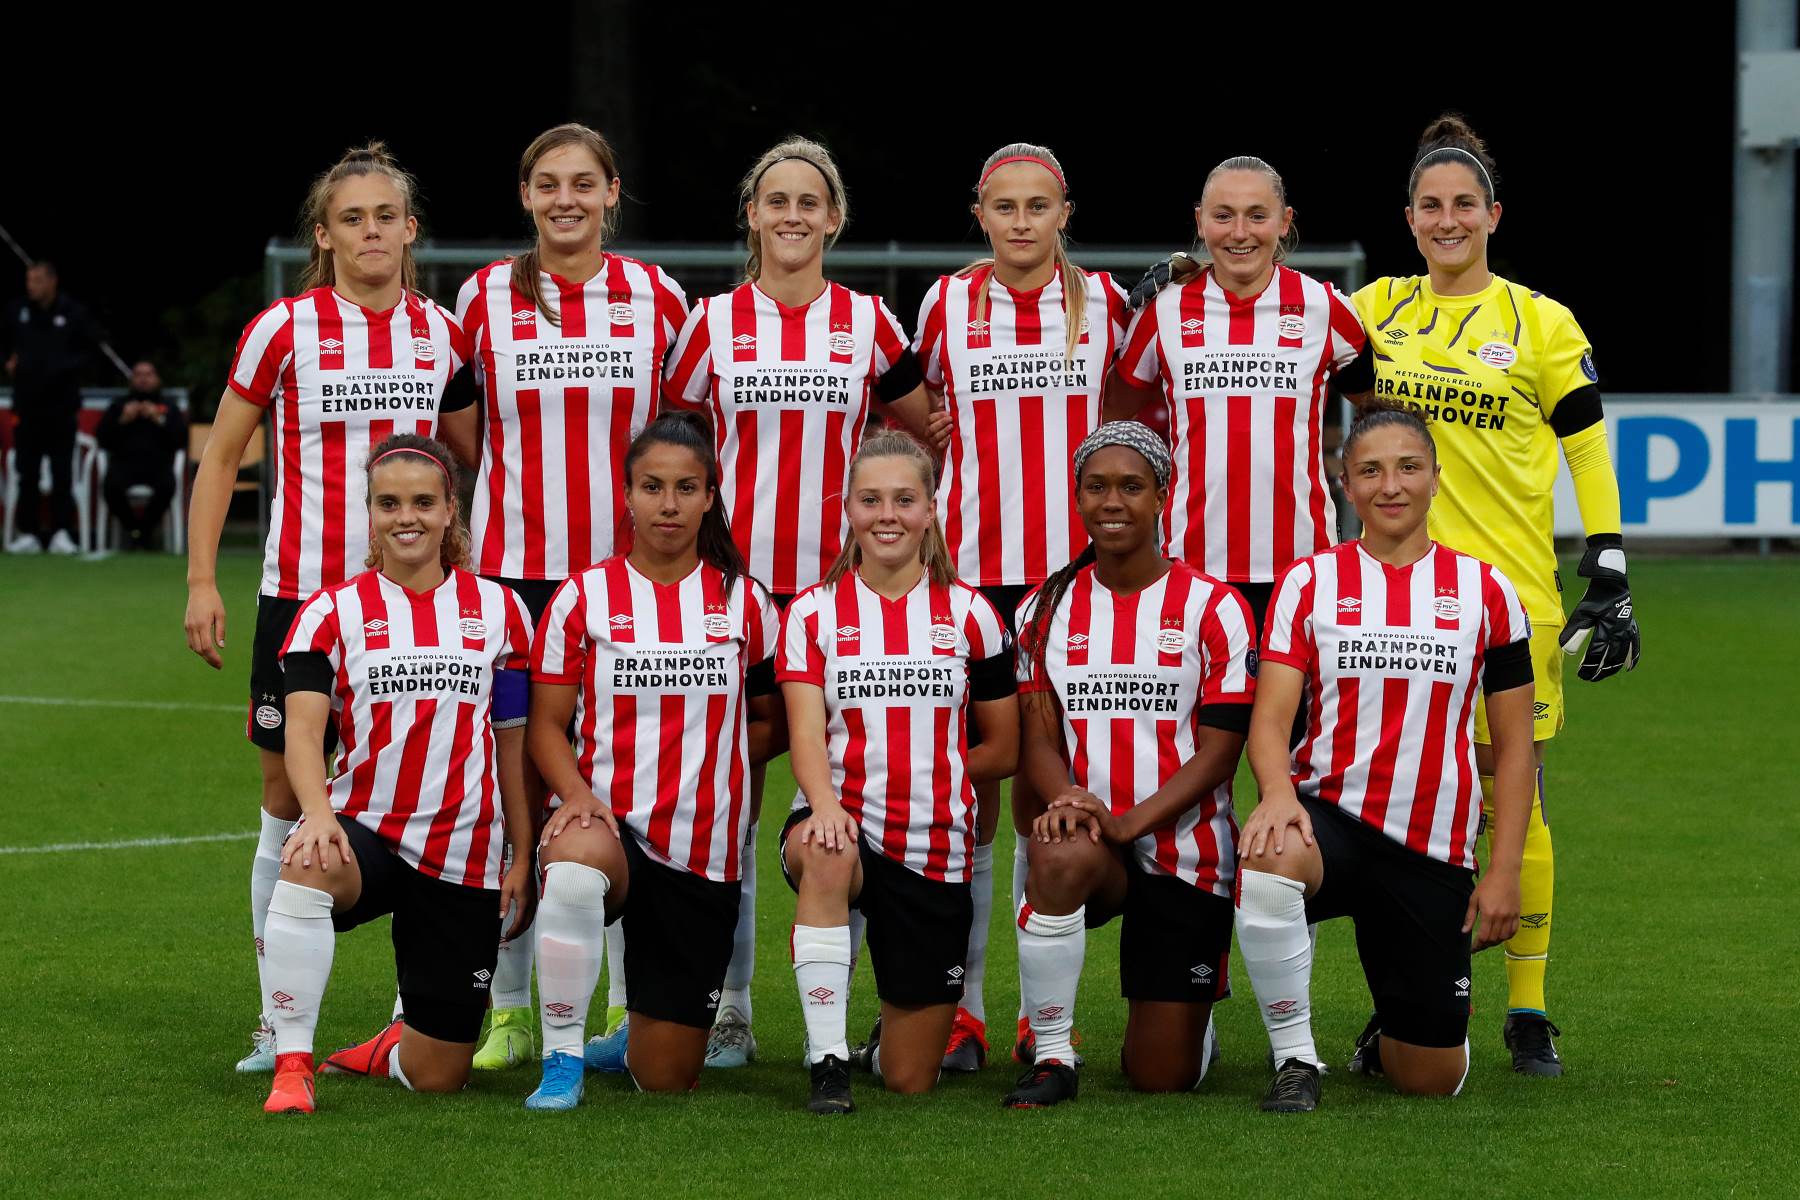 psv-vrouwen-14-football-club-facts